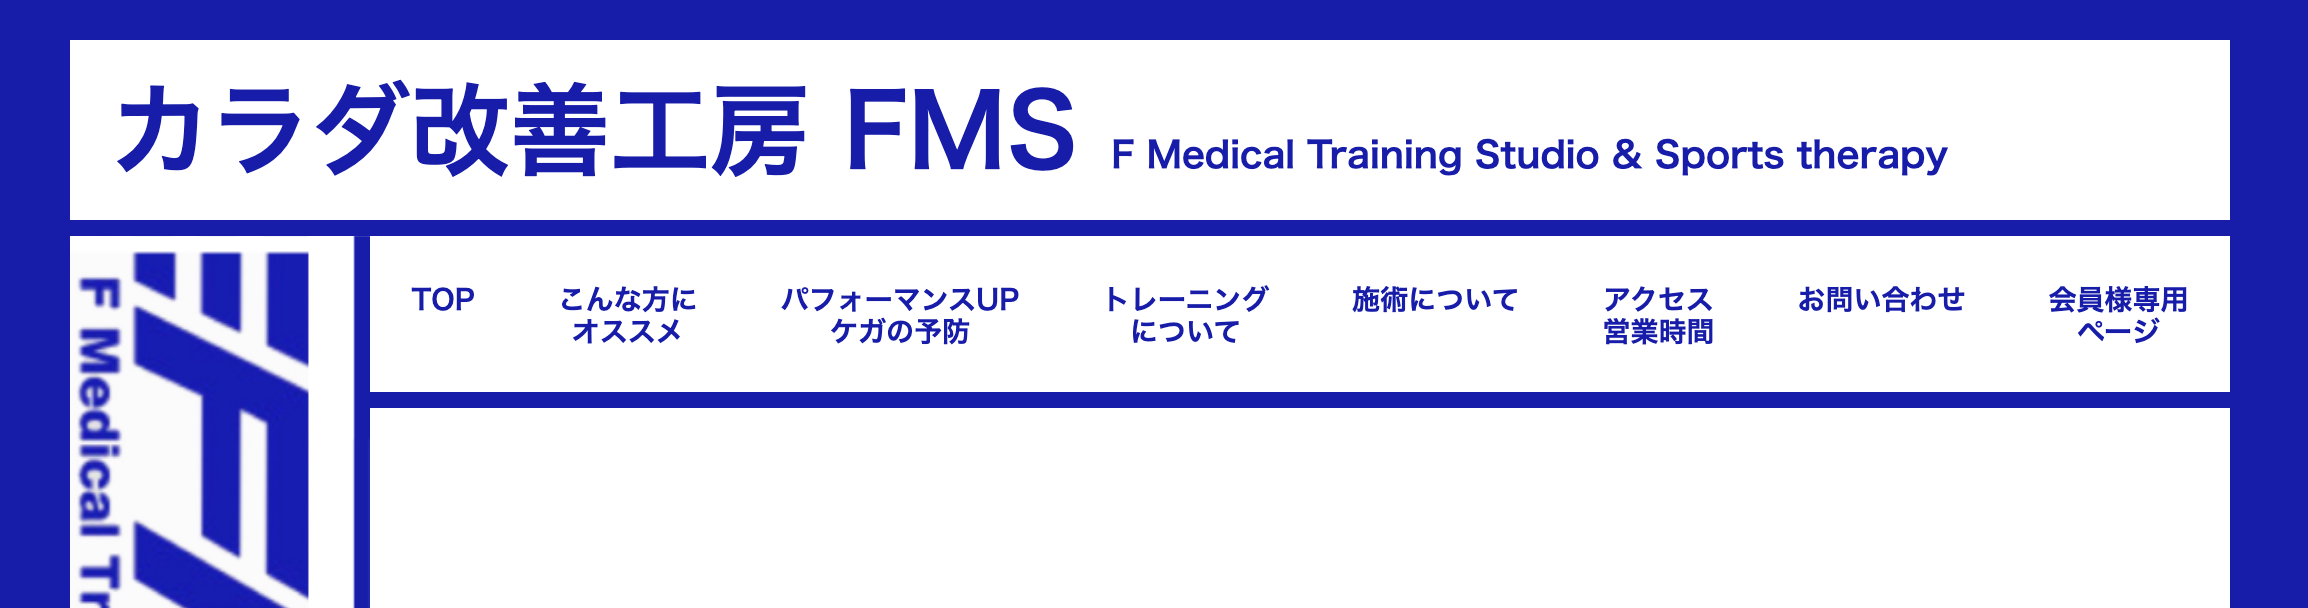 F Medical training studio & Sports therapy